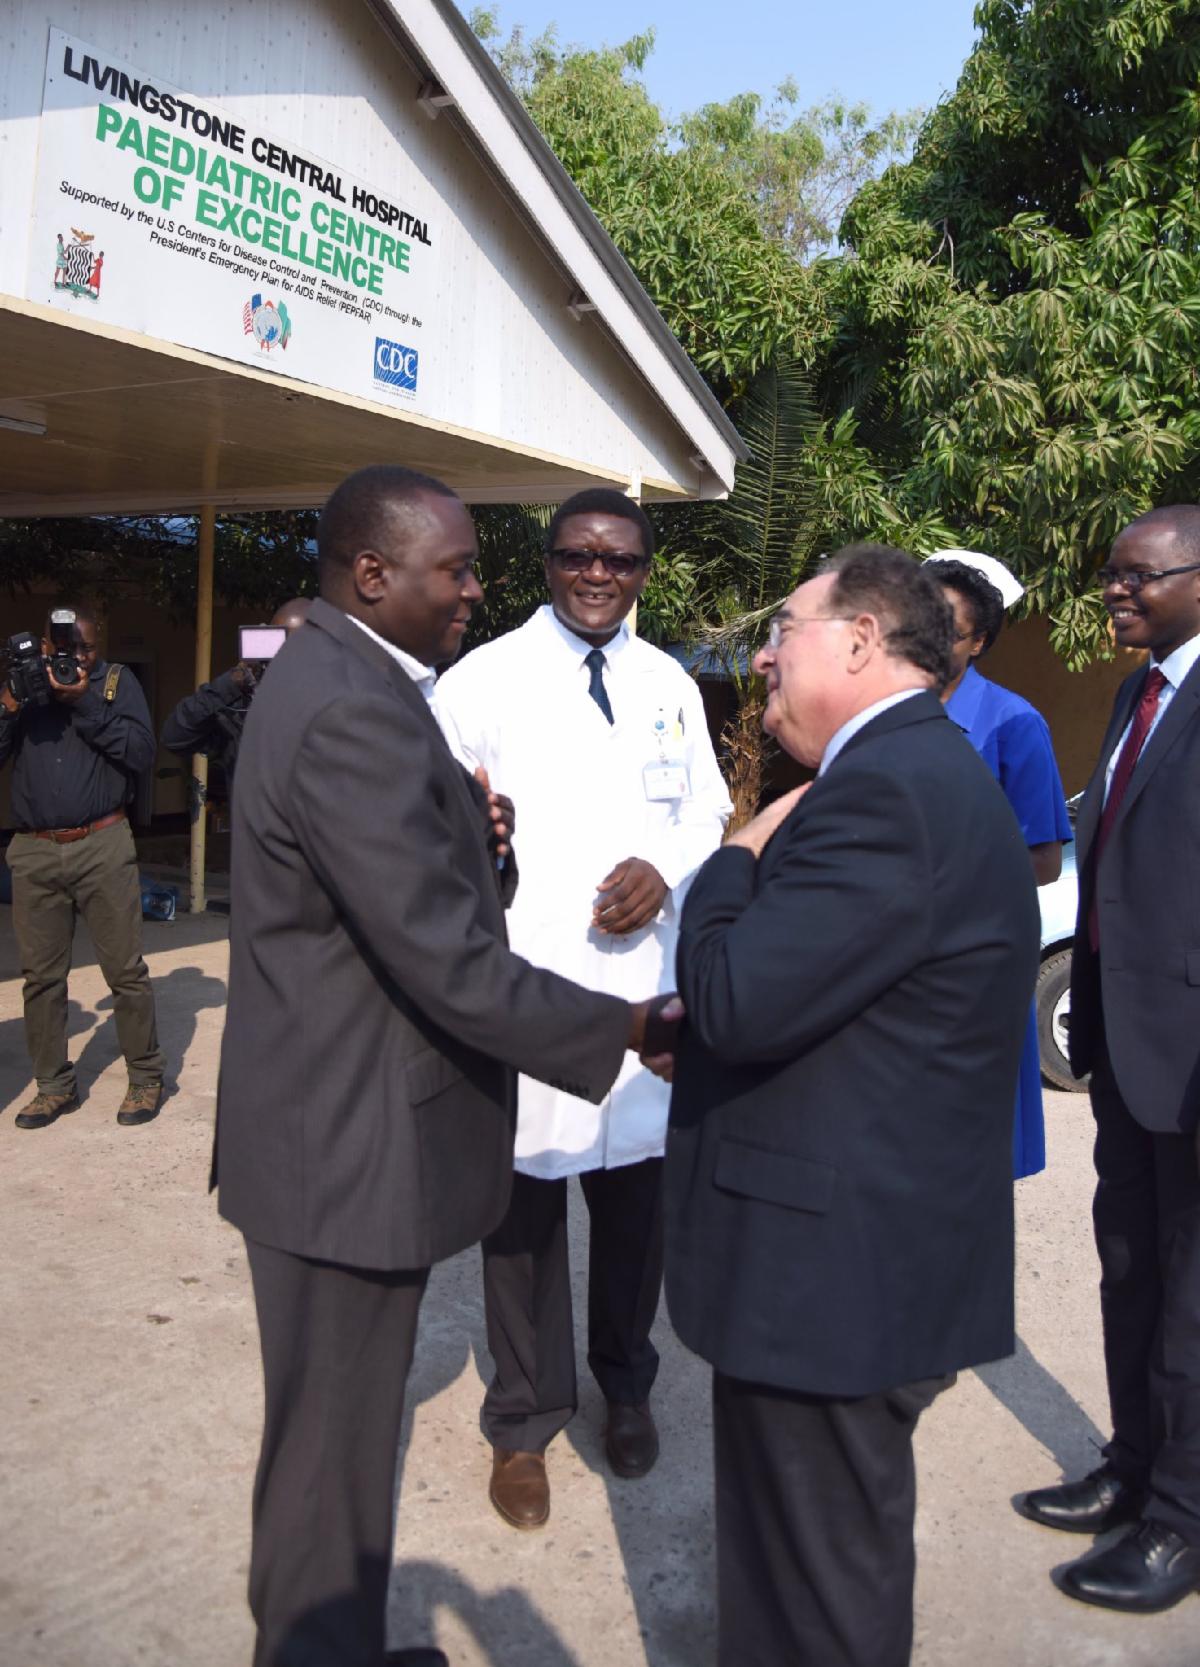 Dr. Perman meets with doctors in Zambia